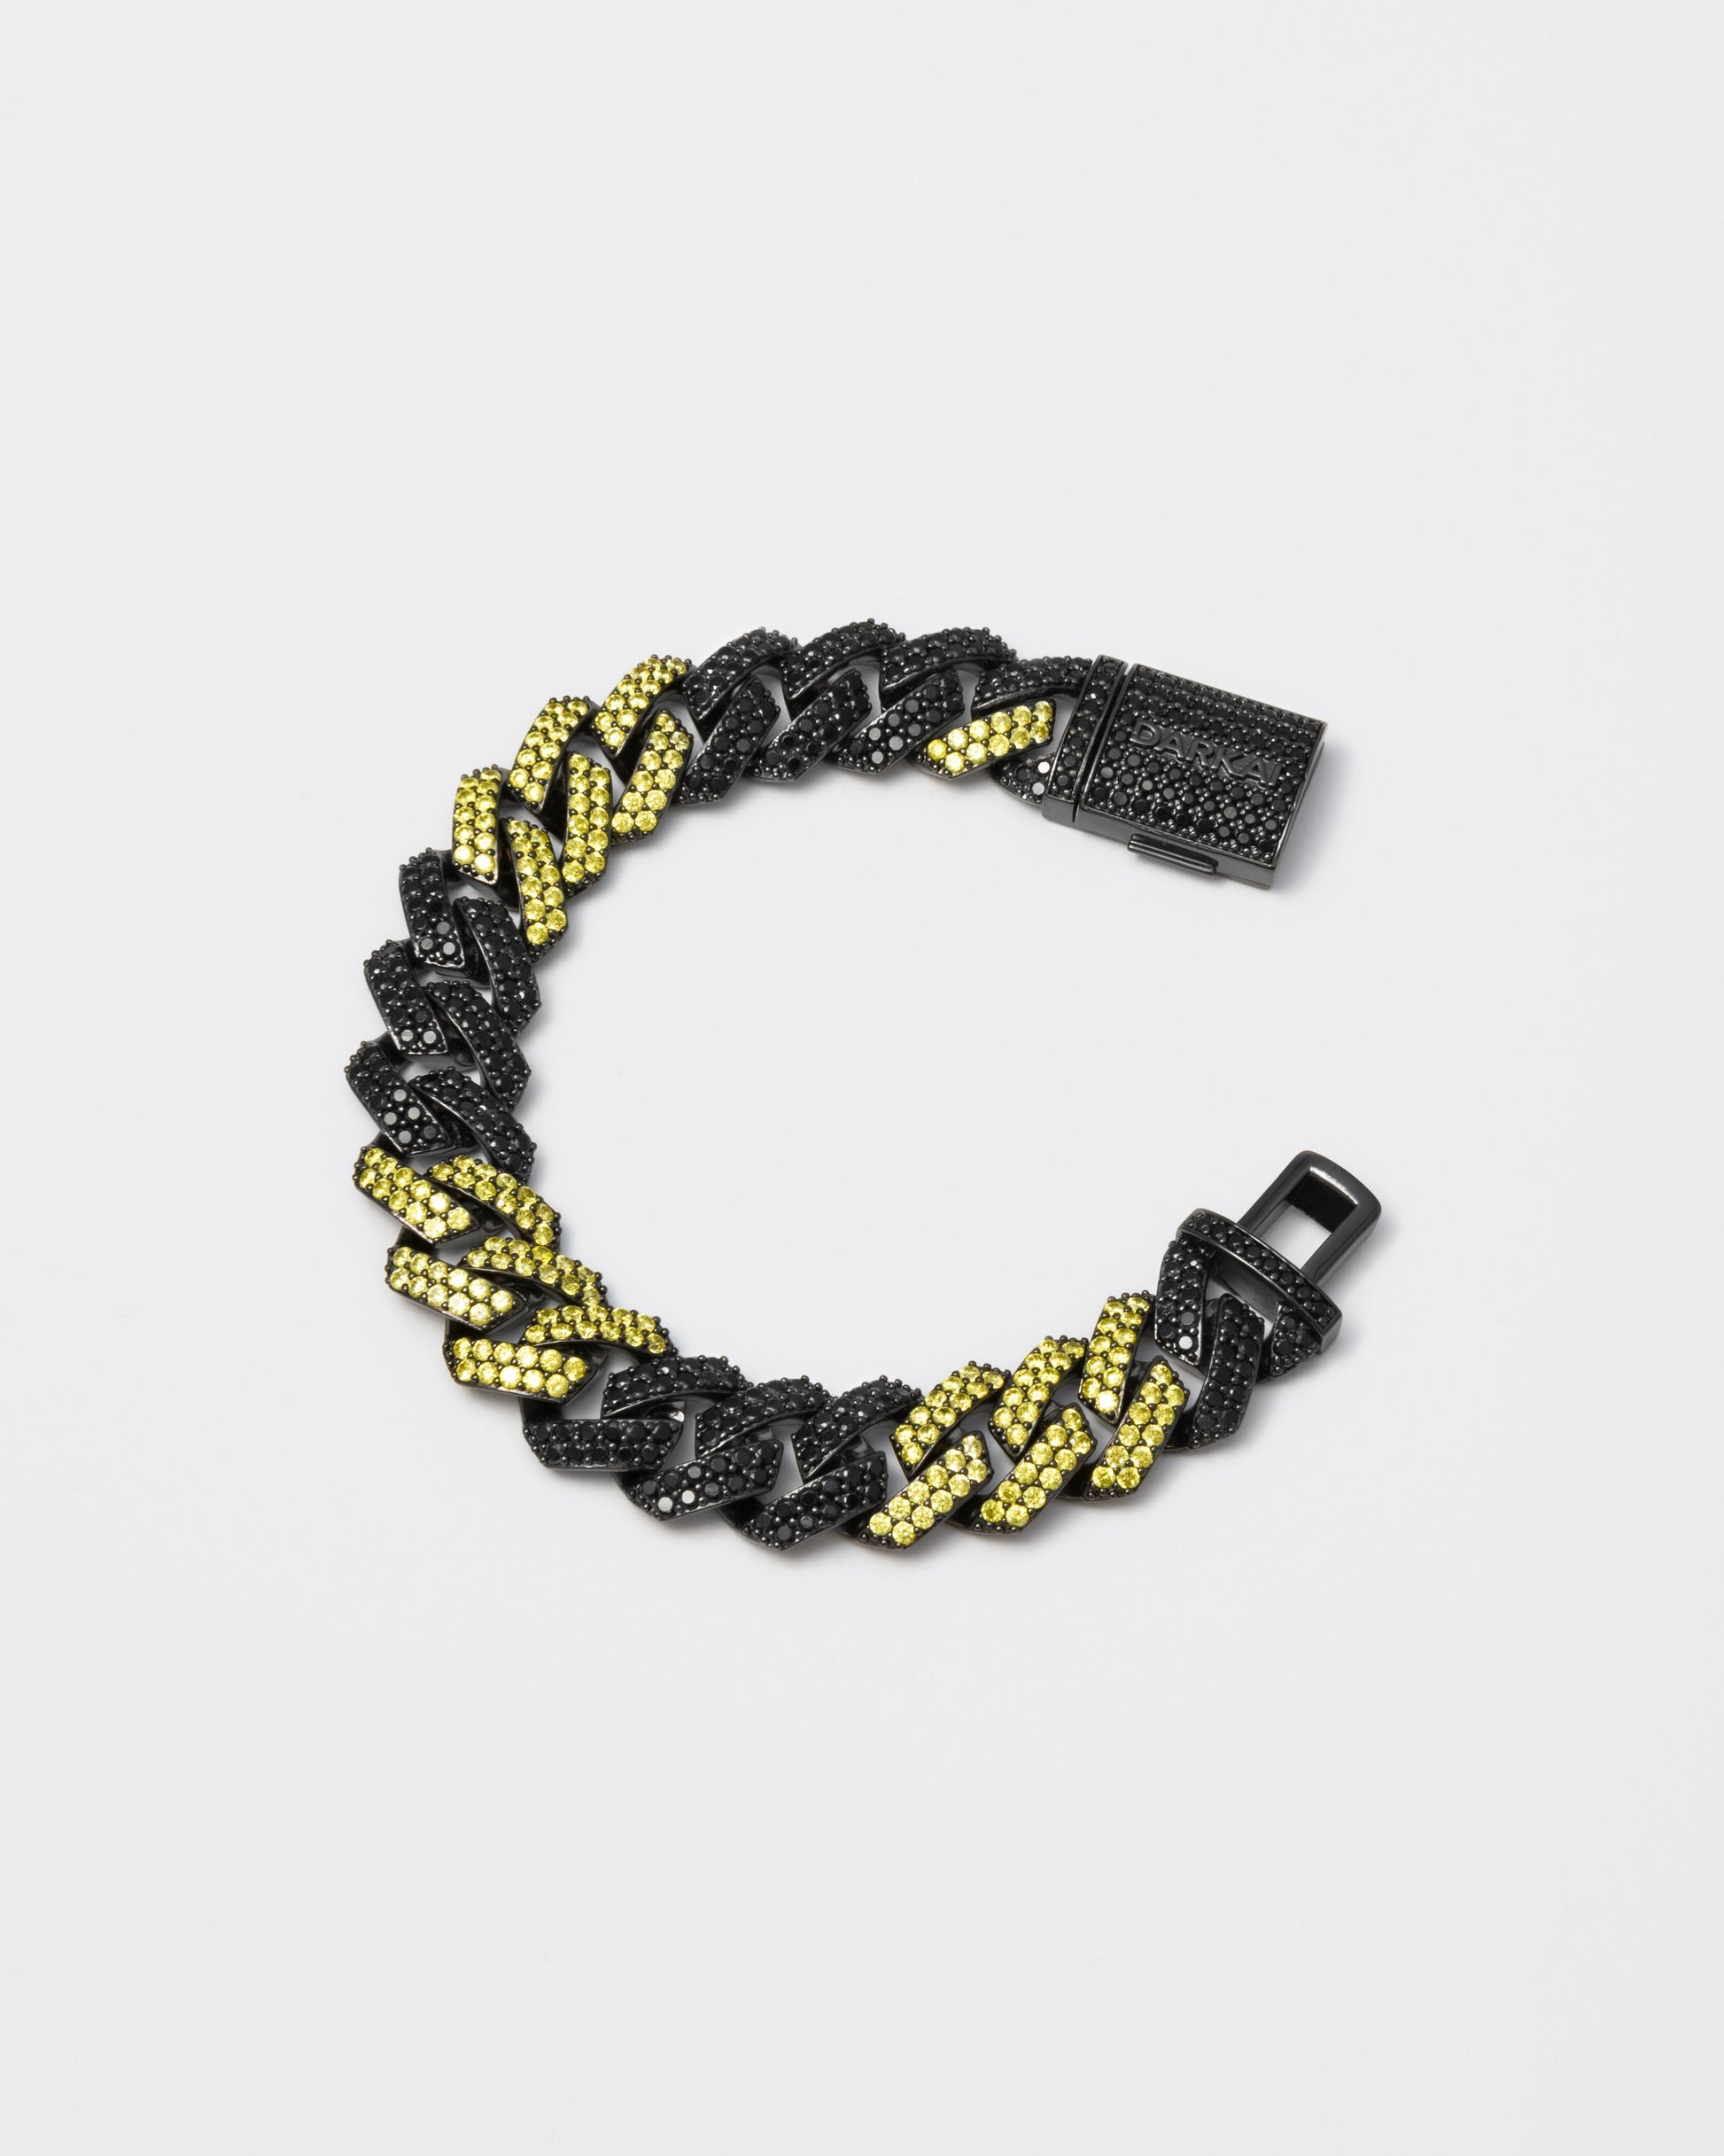 Prong chain bracelet with deep black PVD coating and hand-set micropavé stones in black and golden yellow. Fine jewelry grade drawer closure with logo